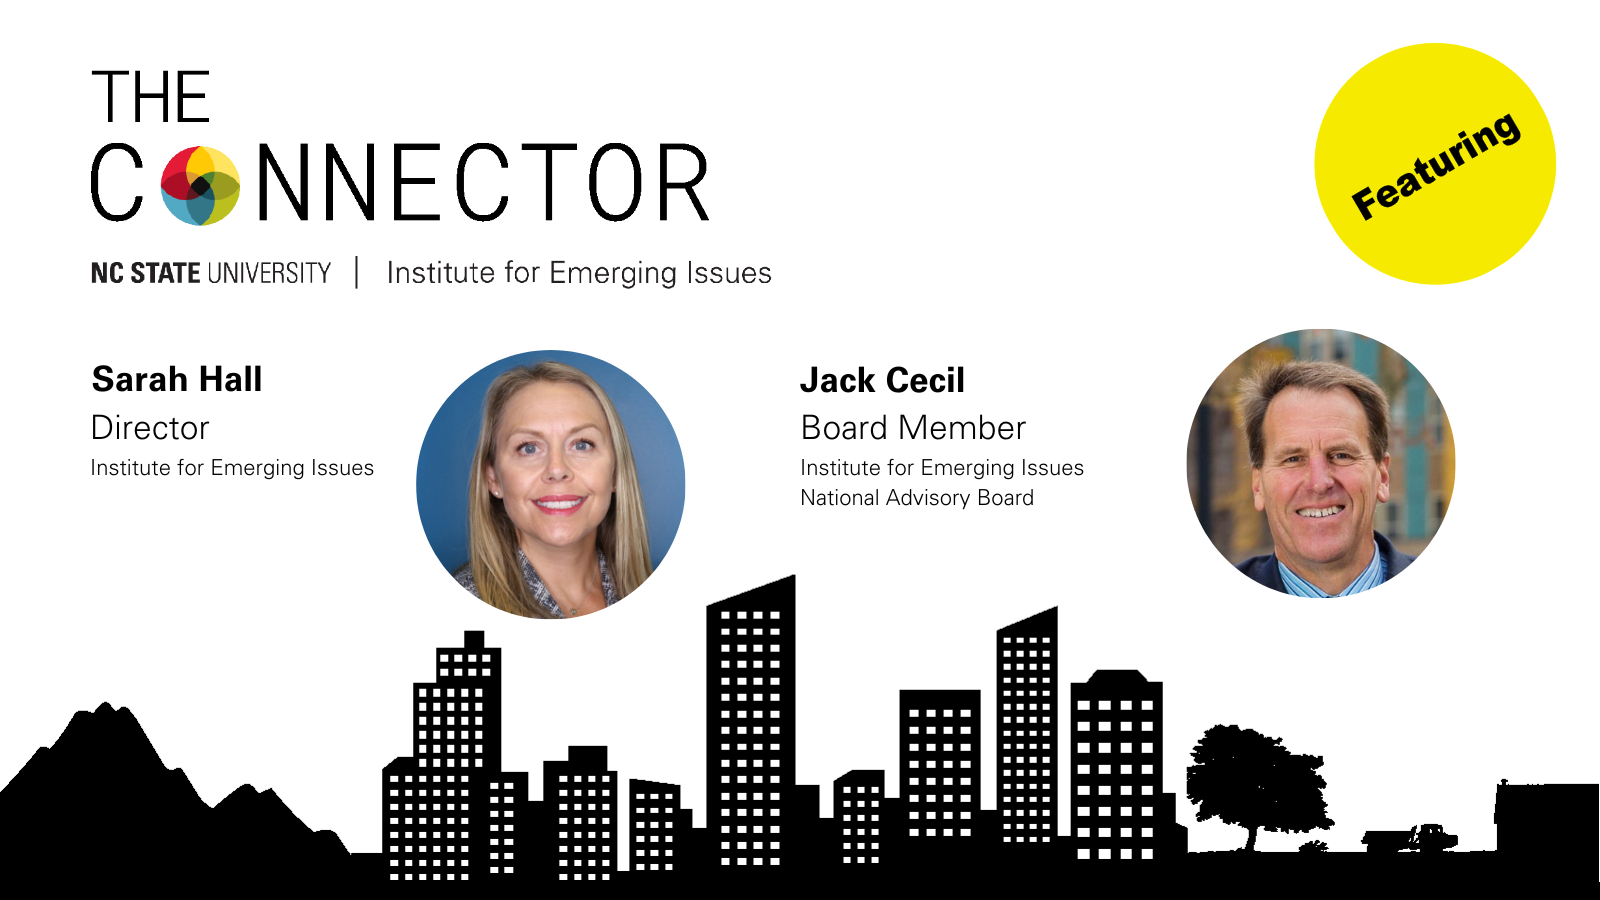 Image announcing episode 24 of The Connector Podcast featuring IEI Director Sarah Hall and IEI National Advisory Board Member Jack Cecil as guests.